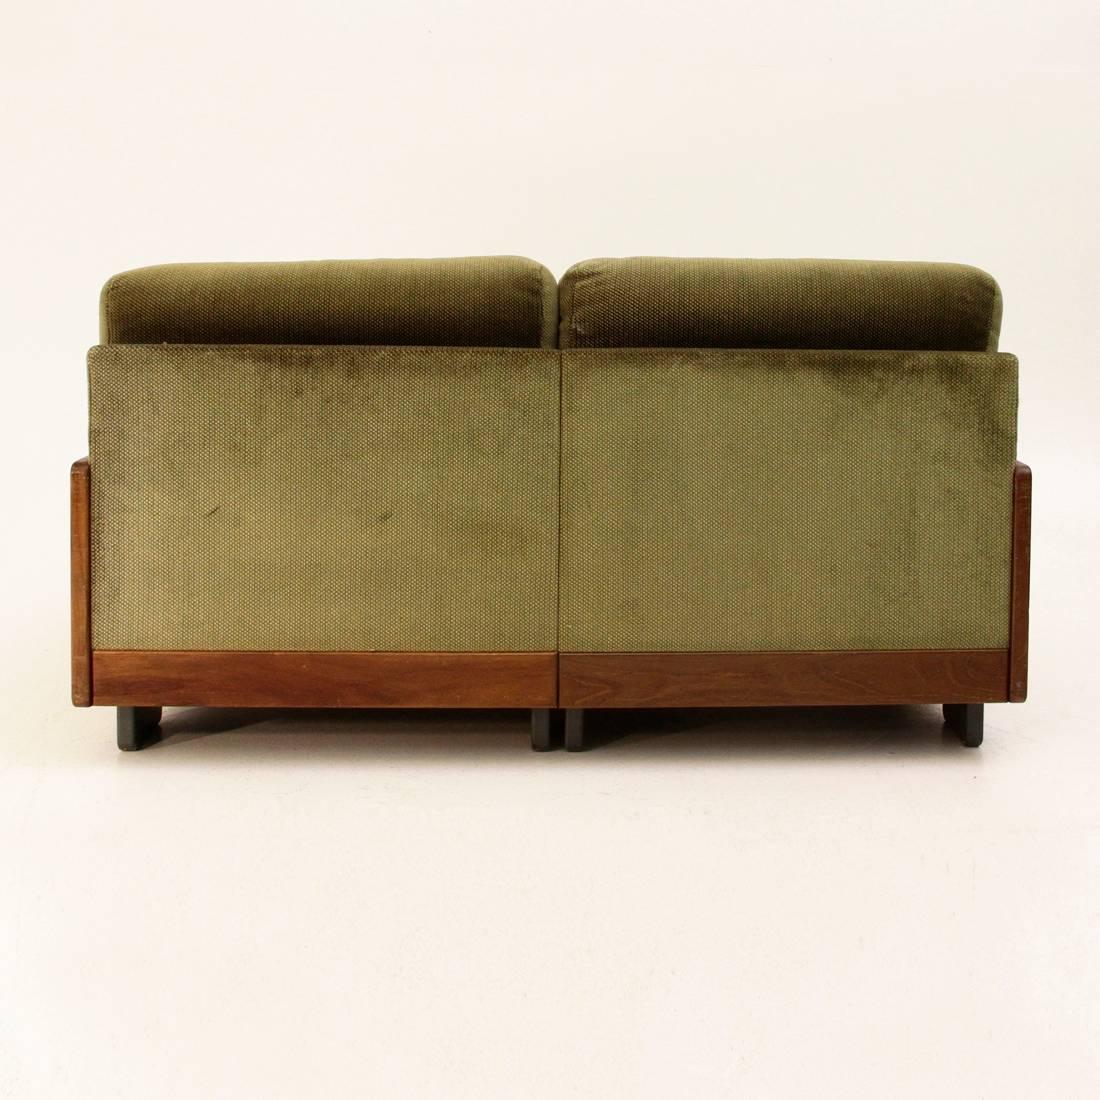 Mid-20th Century Model 920 Sofa by Tobia Scarpa for Cassina, 1960s